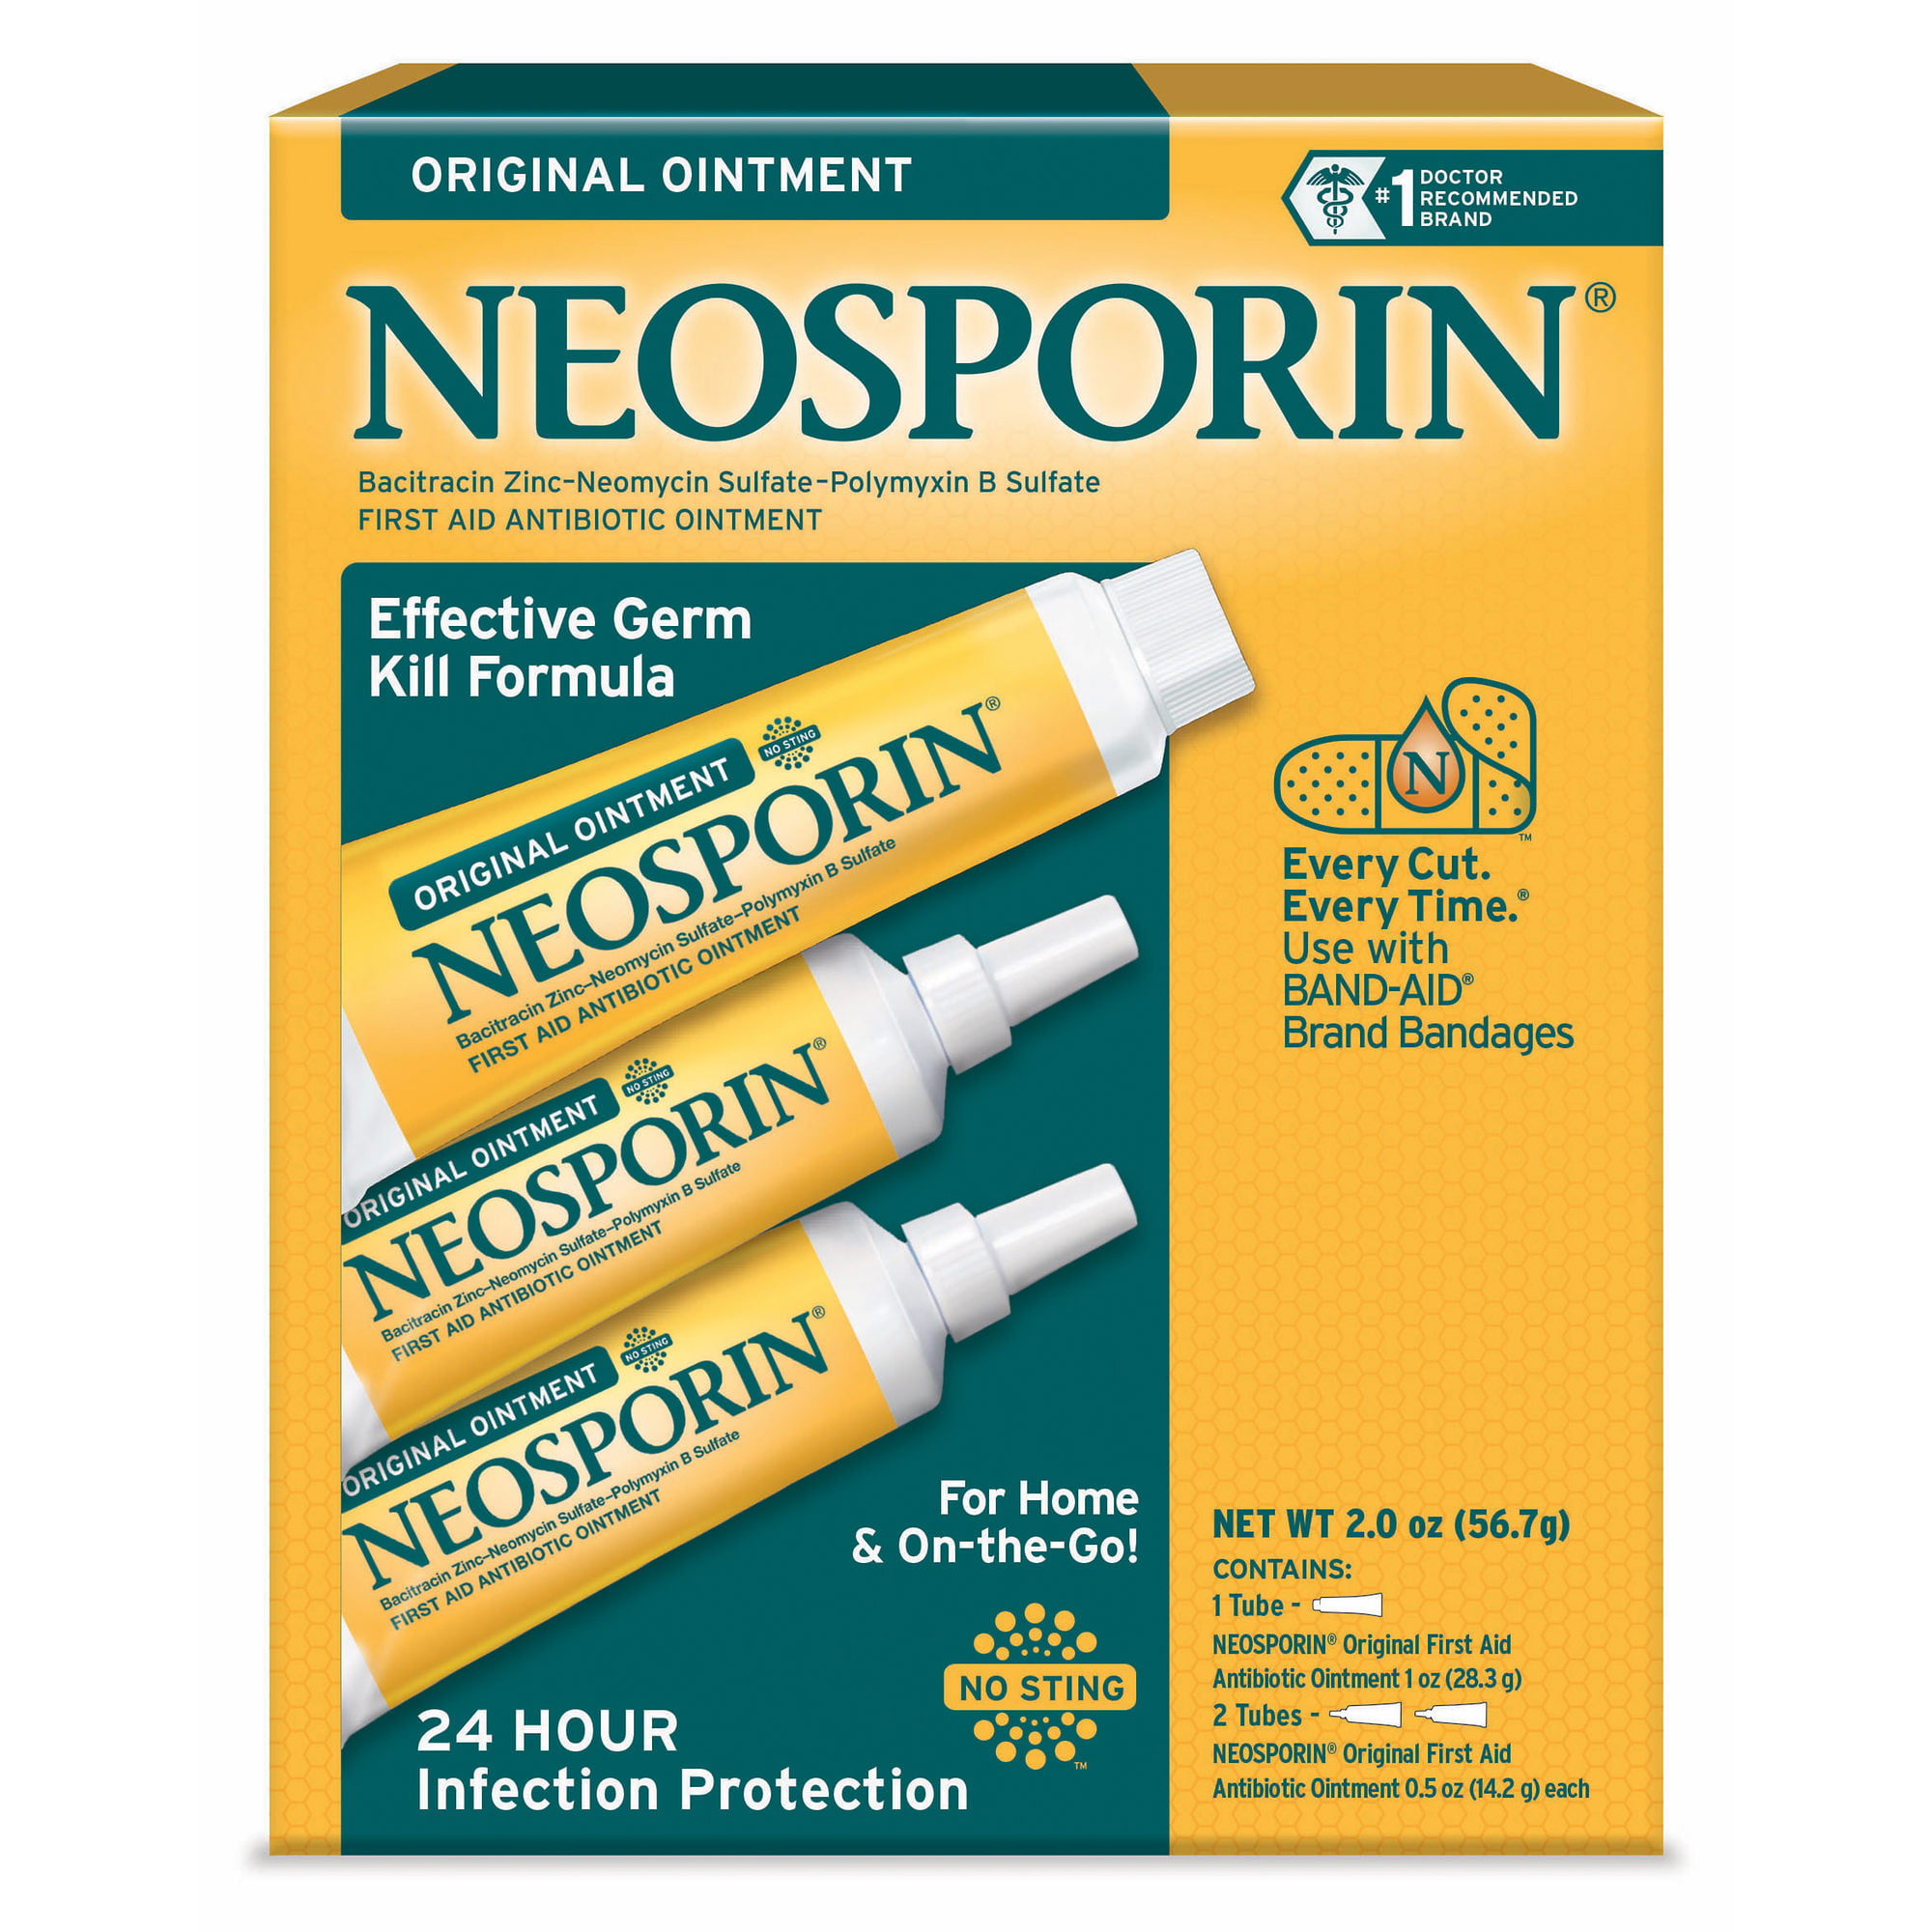 Product of Neosporin First Aid Antibiotic Ointment and Neo ...